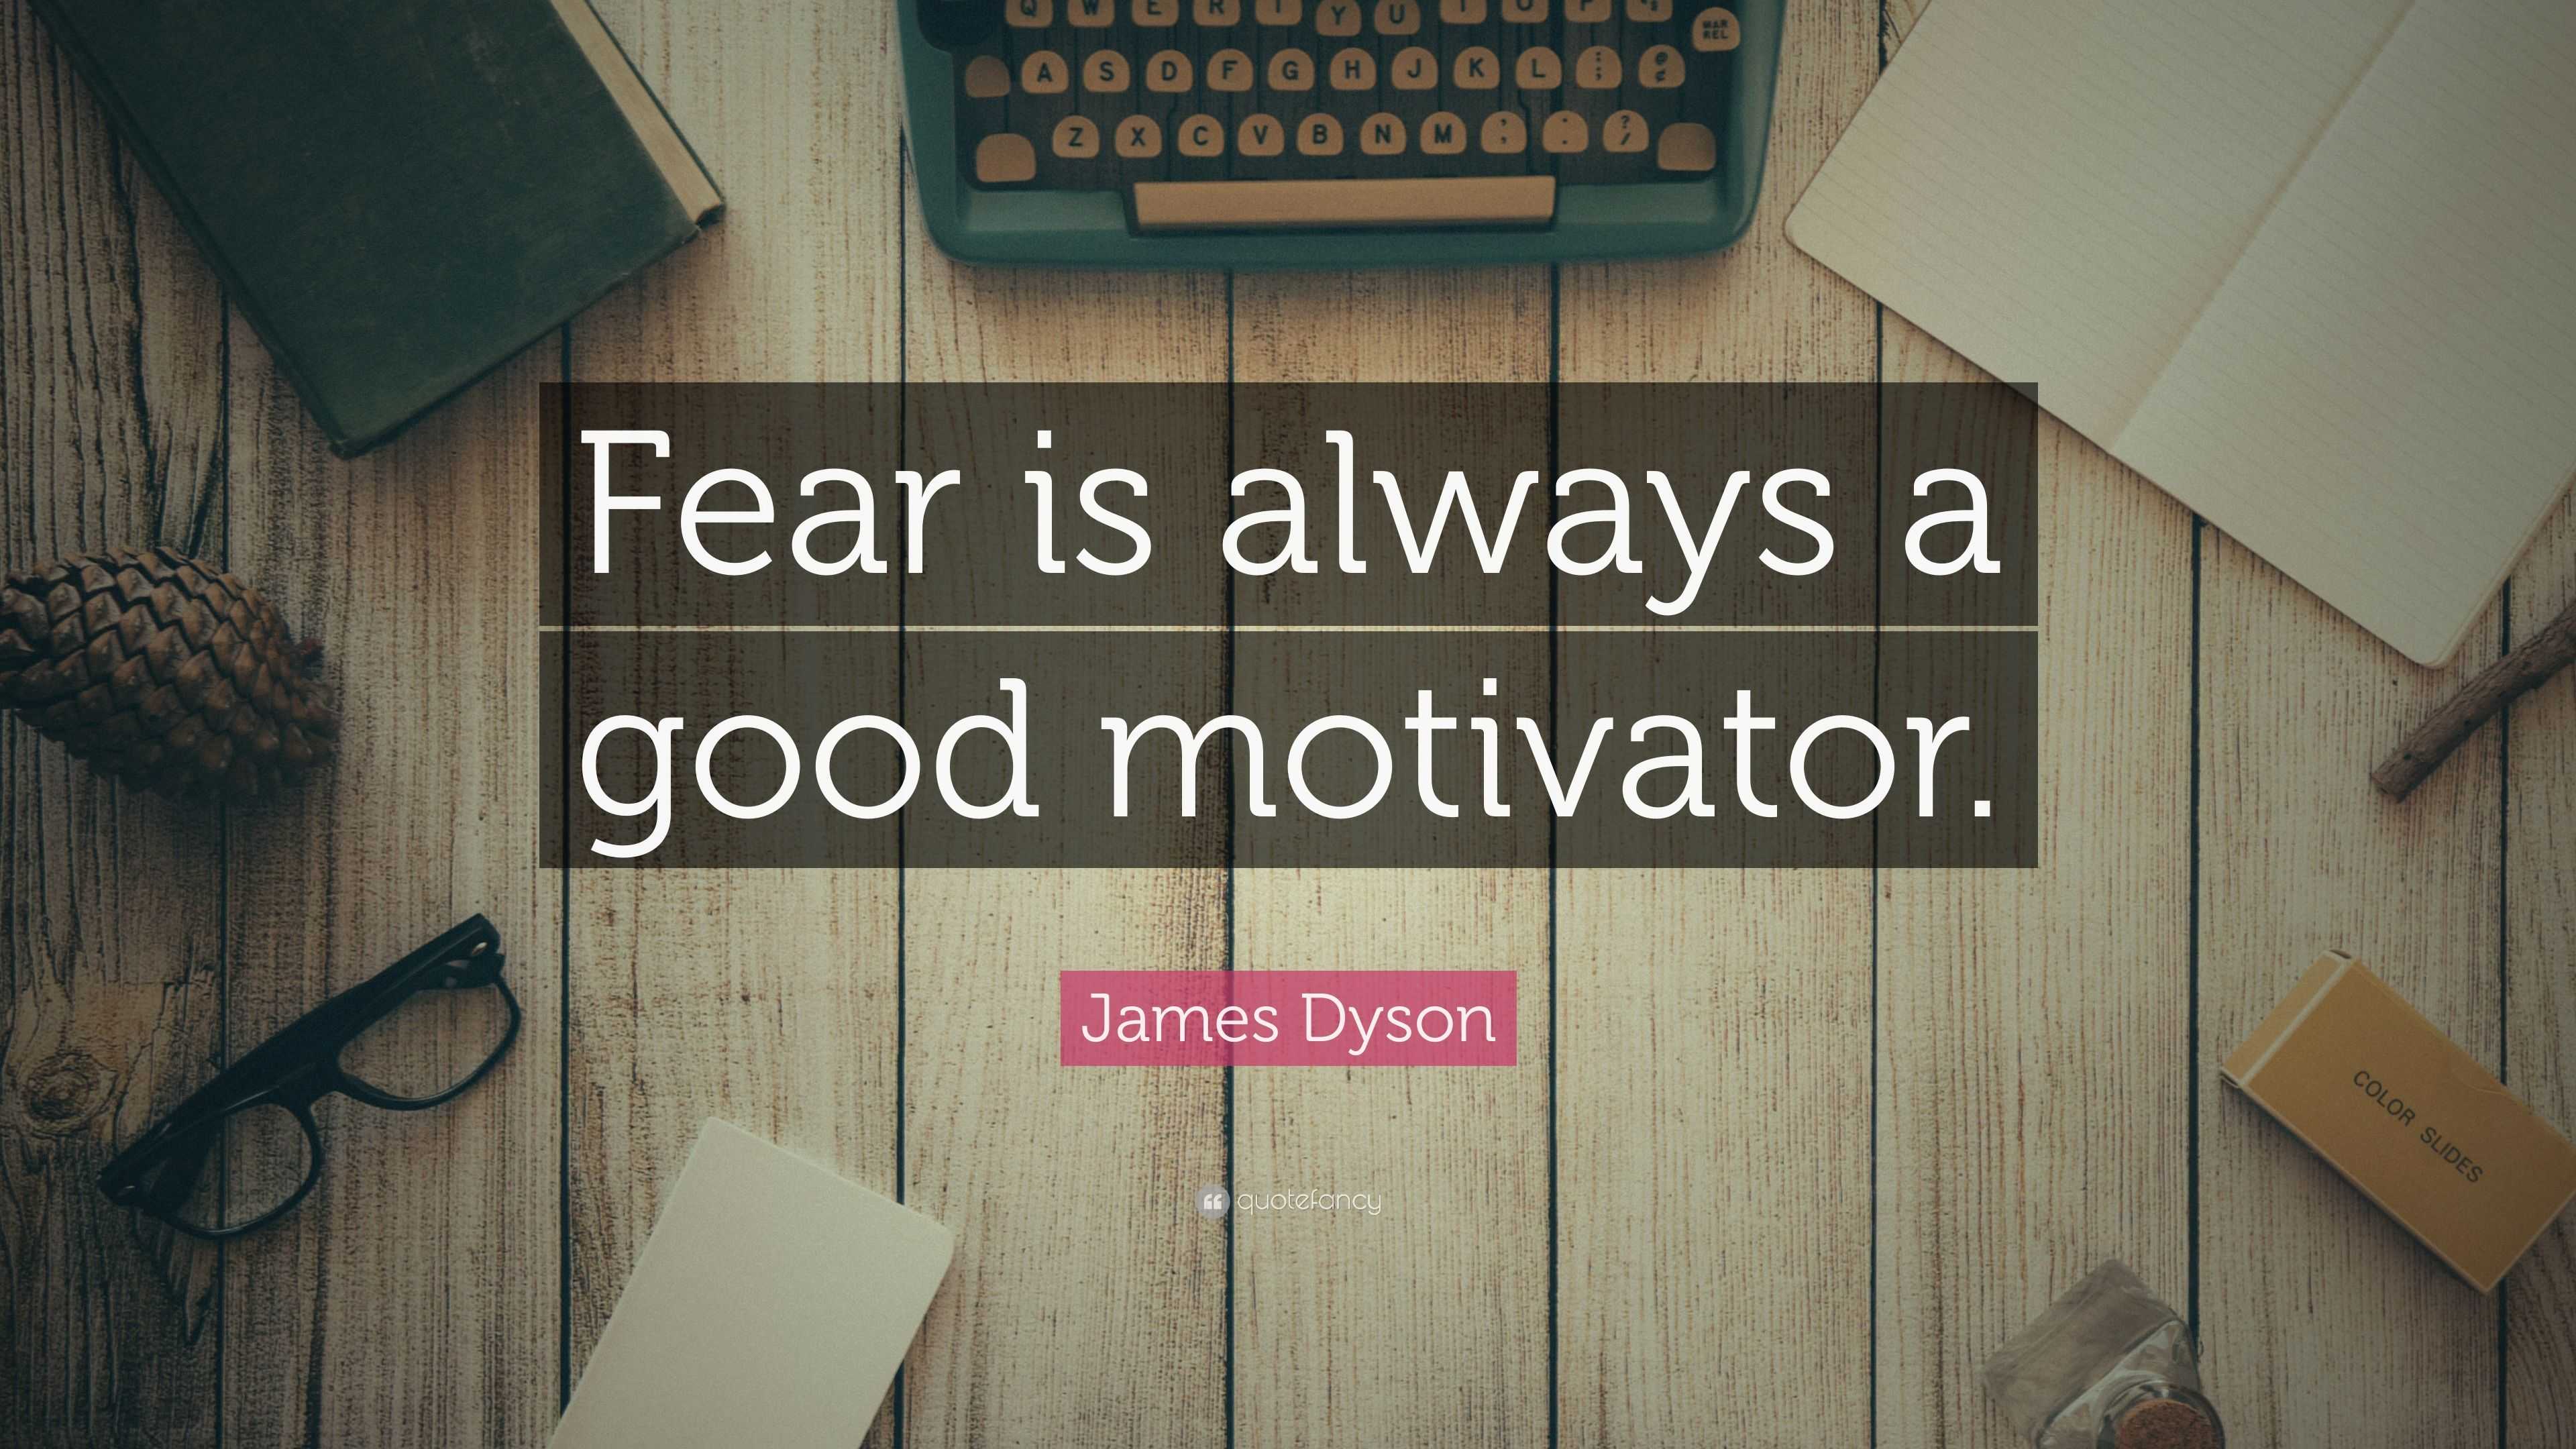 James Dyson Quote: “Fear is always a good motivator.”